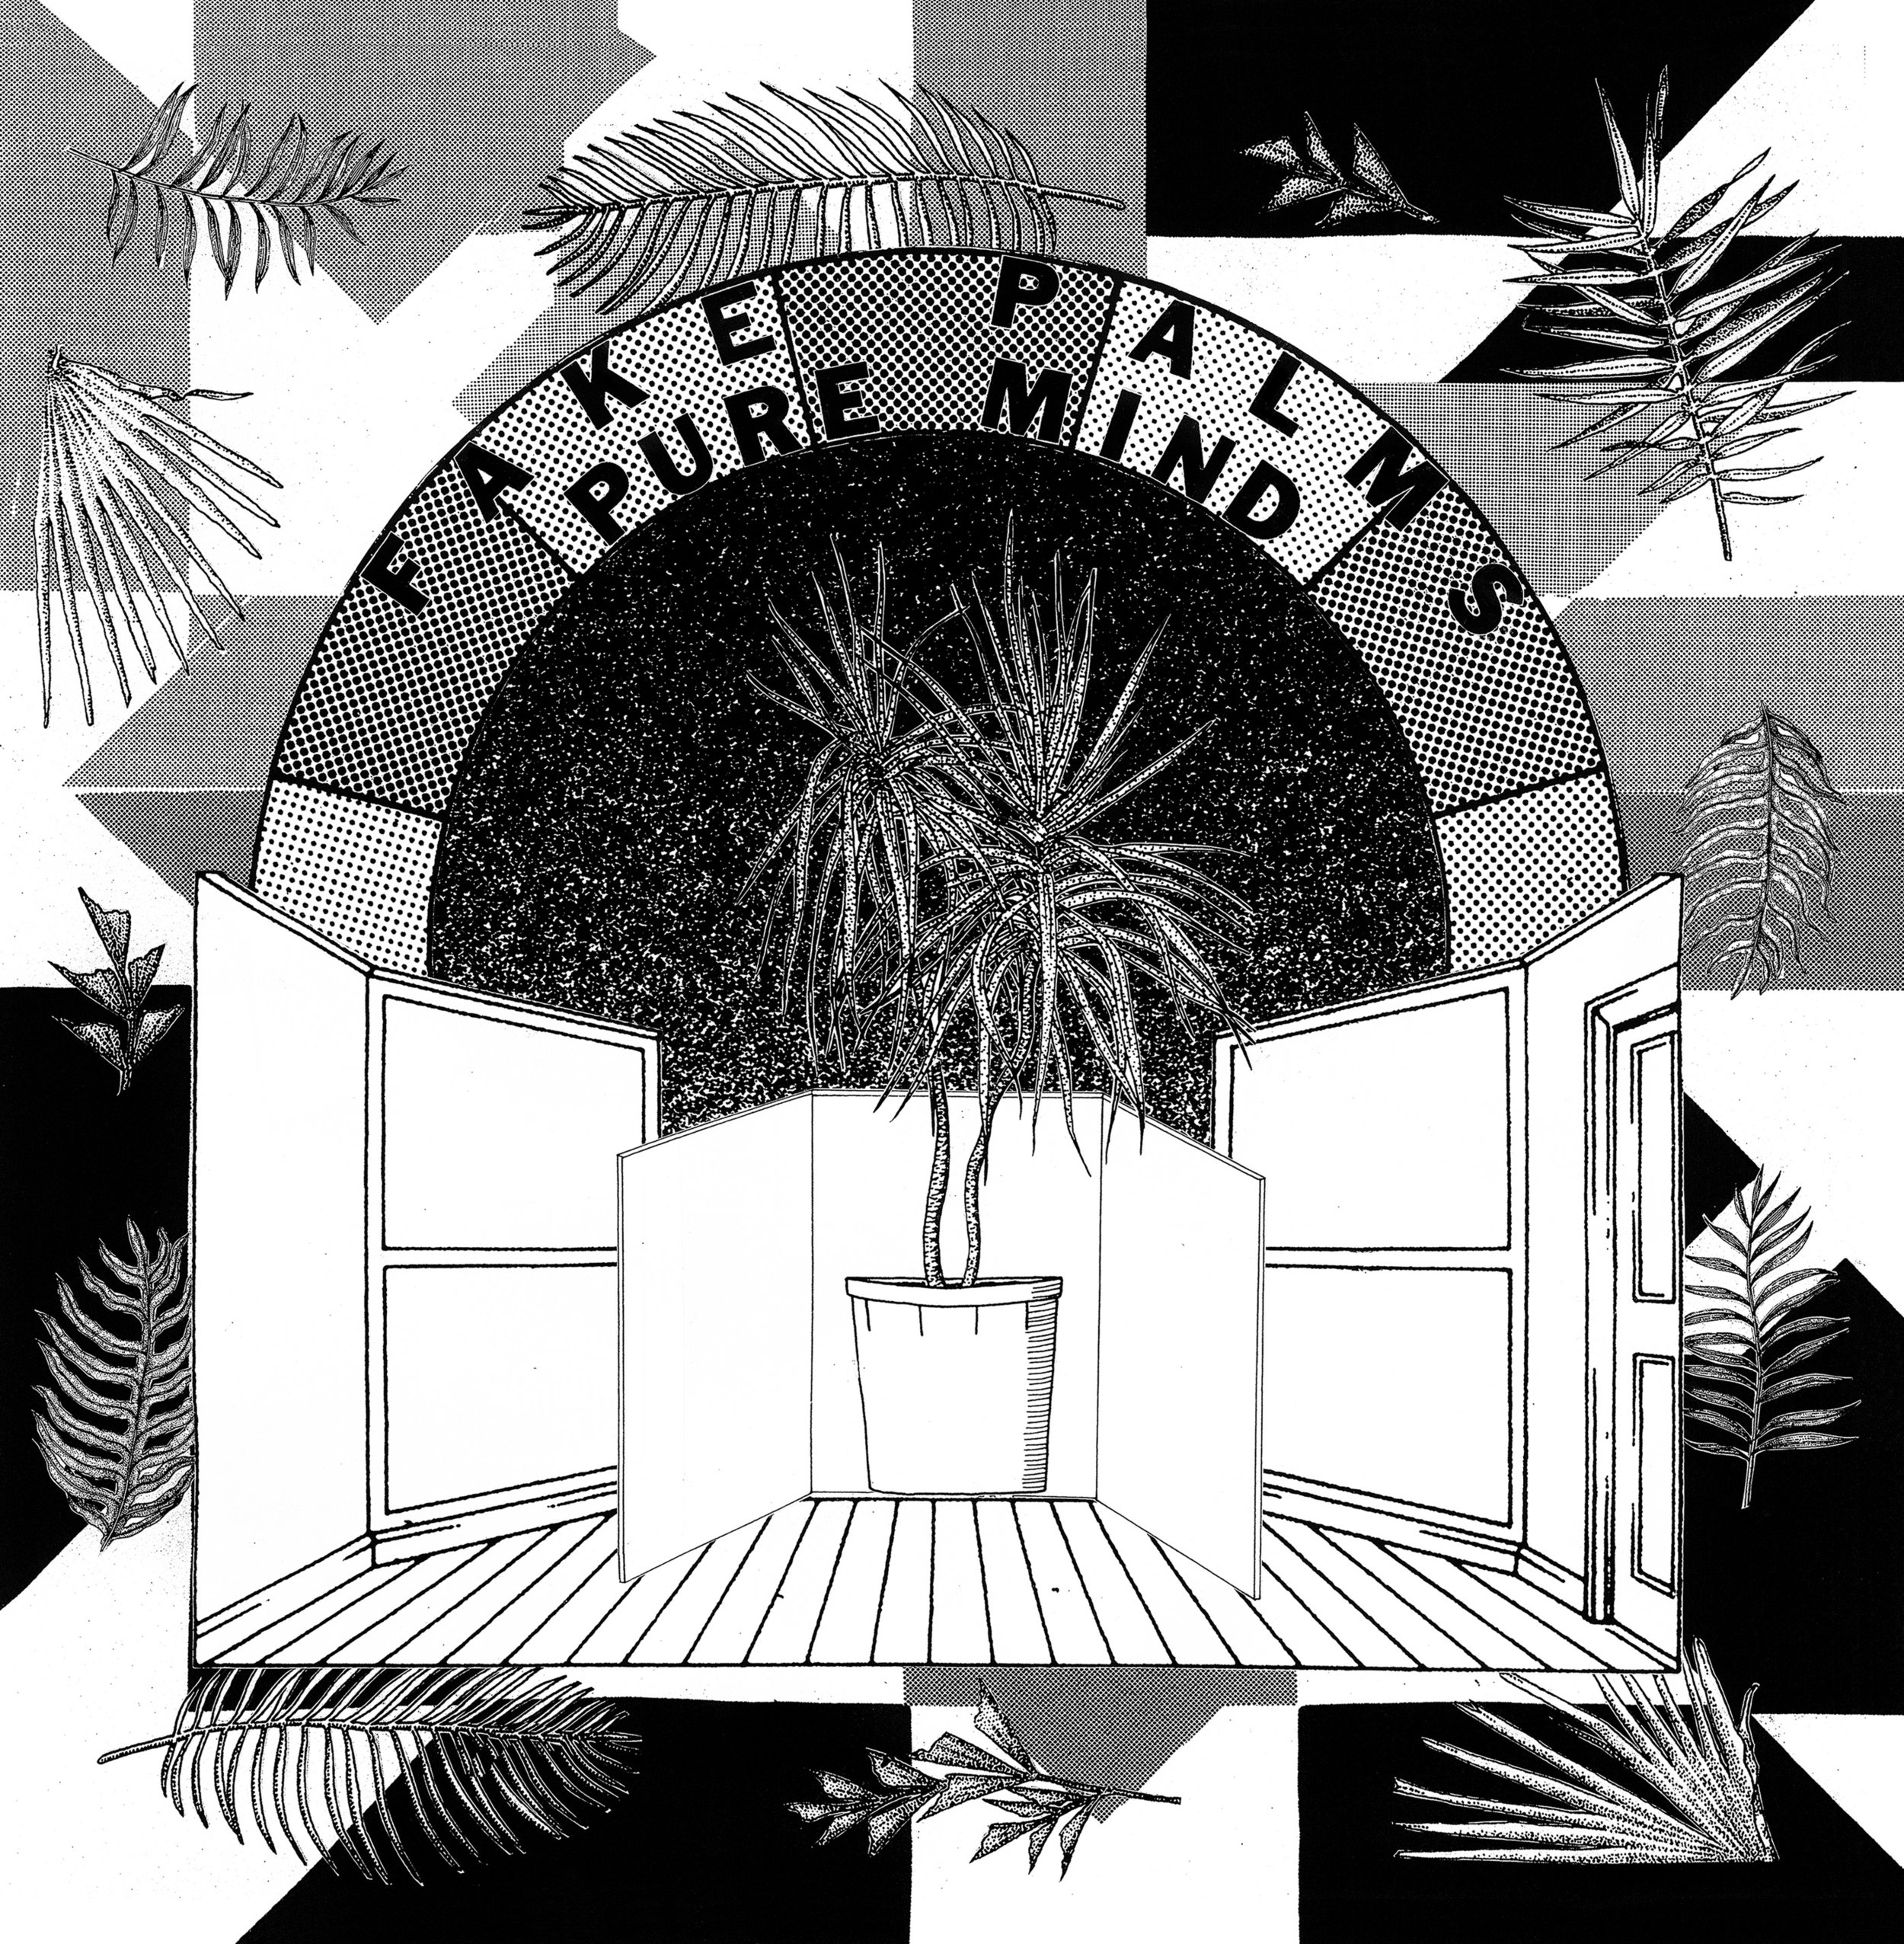  front cover  Fake Palms, Pure Mind 12" LP  2017 